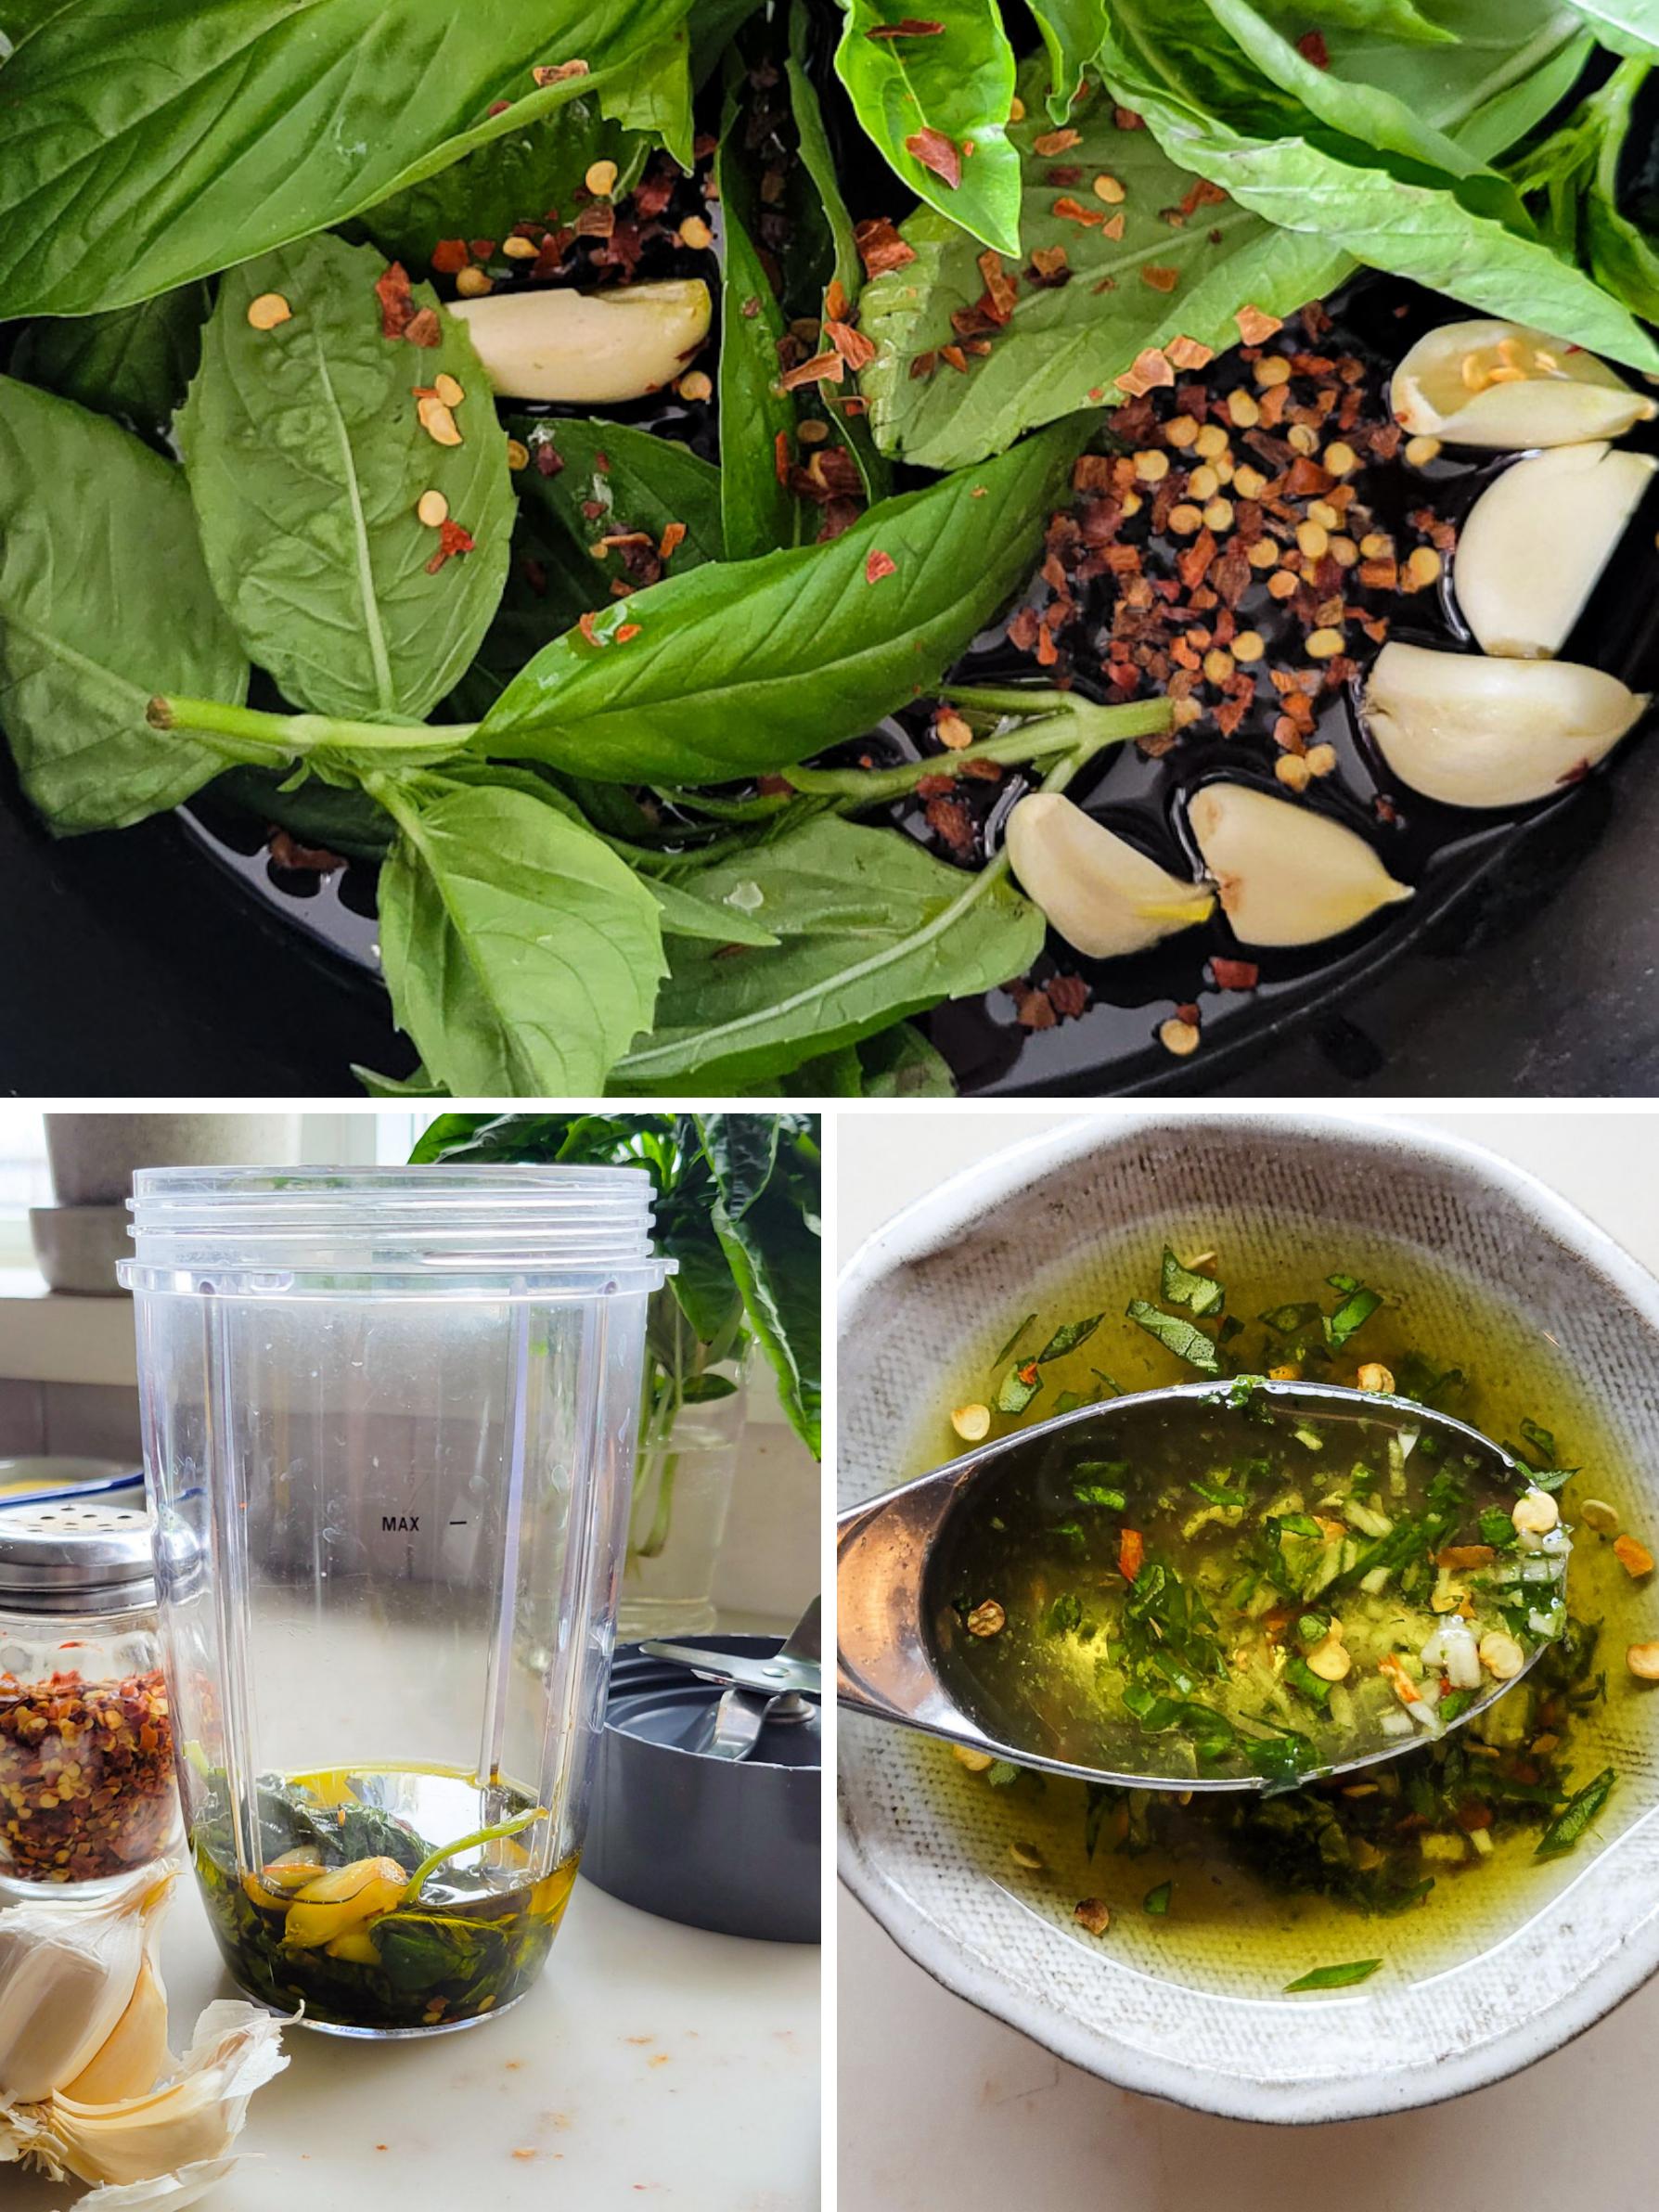 Collage showing how to prepare the Basil and Garlic infused Olive Oil.